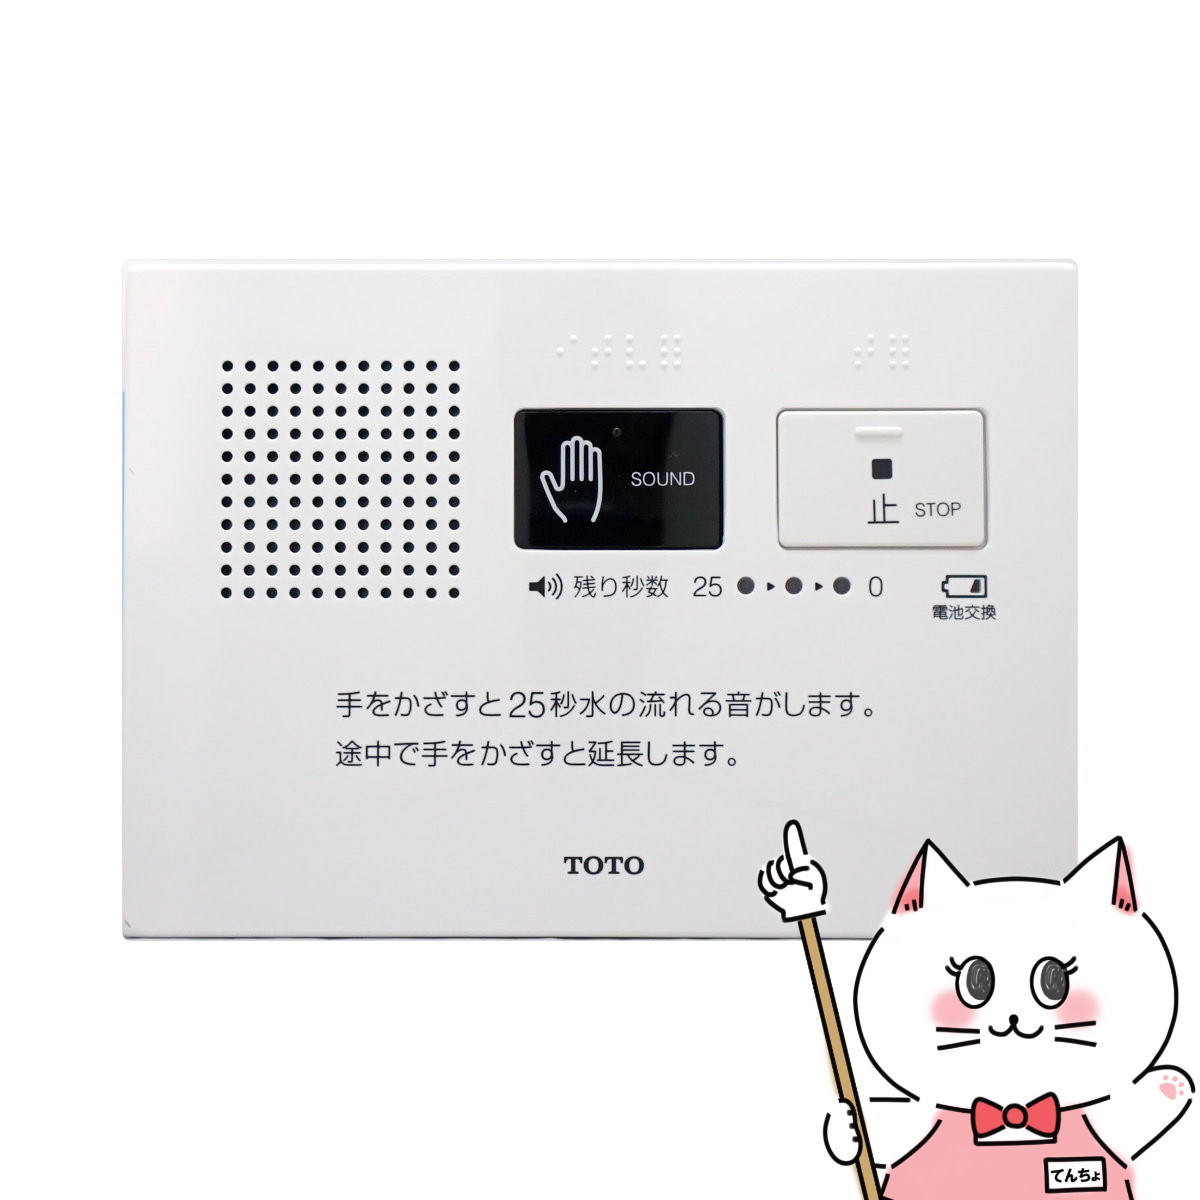 TOTO YES400DR 音姫 トイレ用擬音装置 トートー 【東陶 手かざし 露出タイプ 乾電池タイプ】【宅配便送料無料】 6049857 